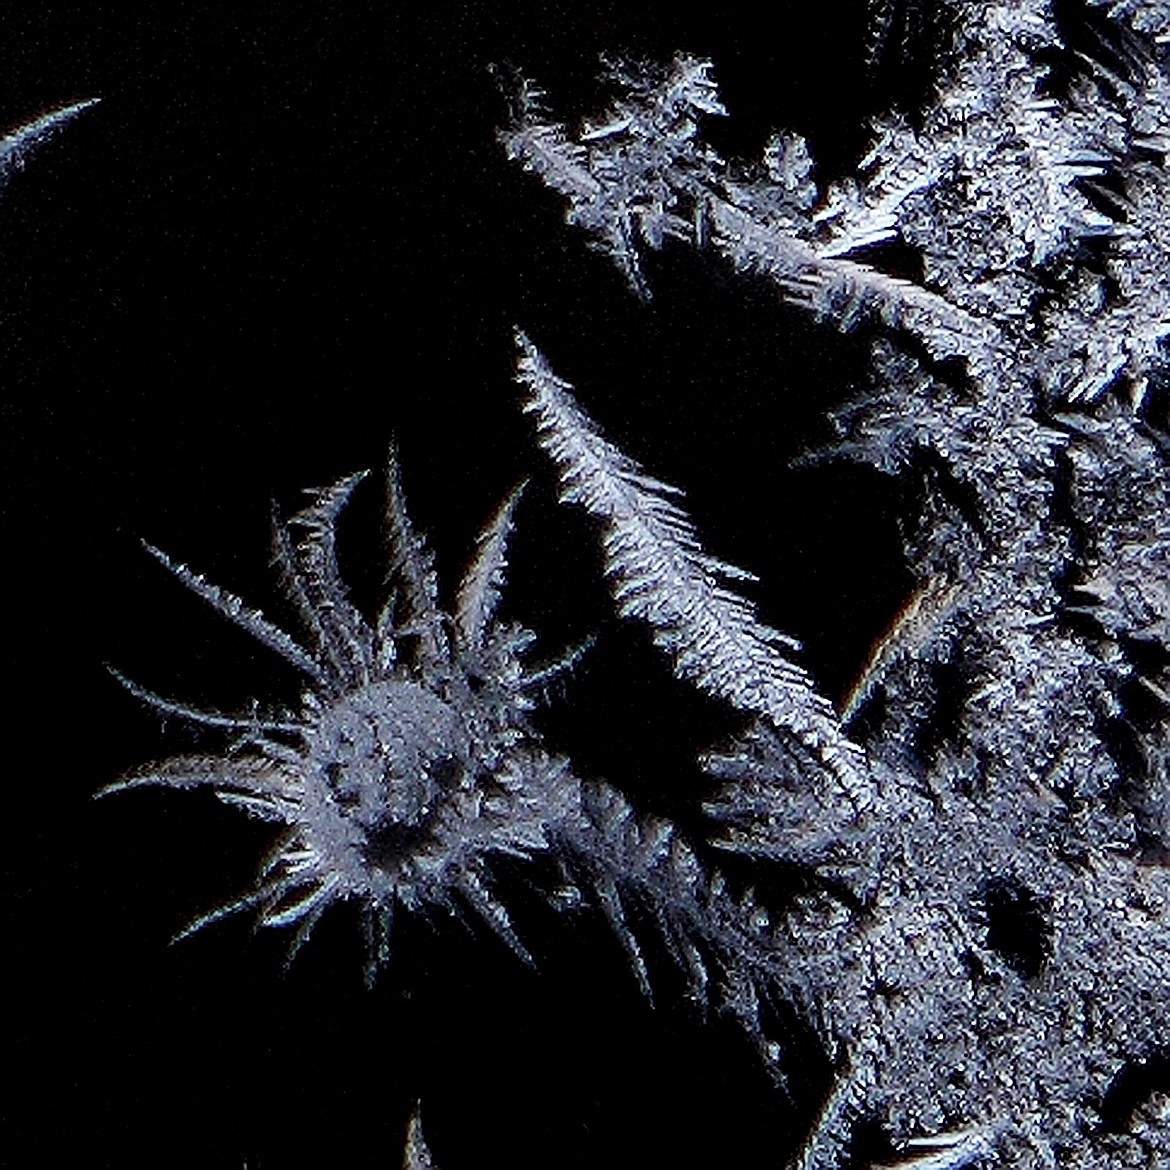 Frost forms ice crystals on a window, by Joan Budai